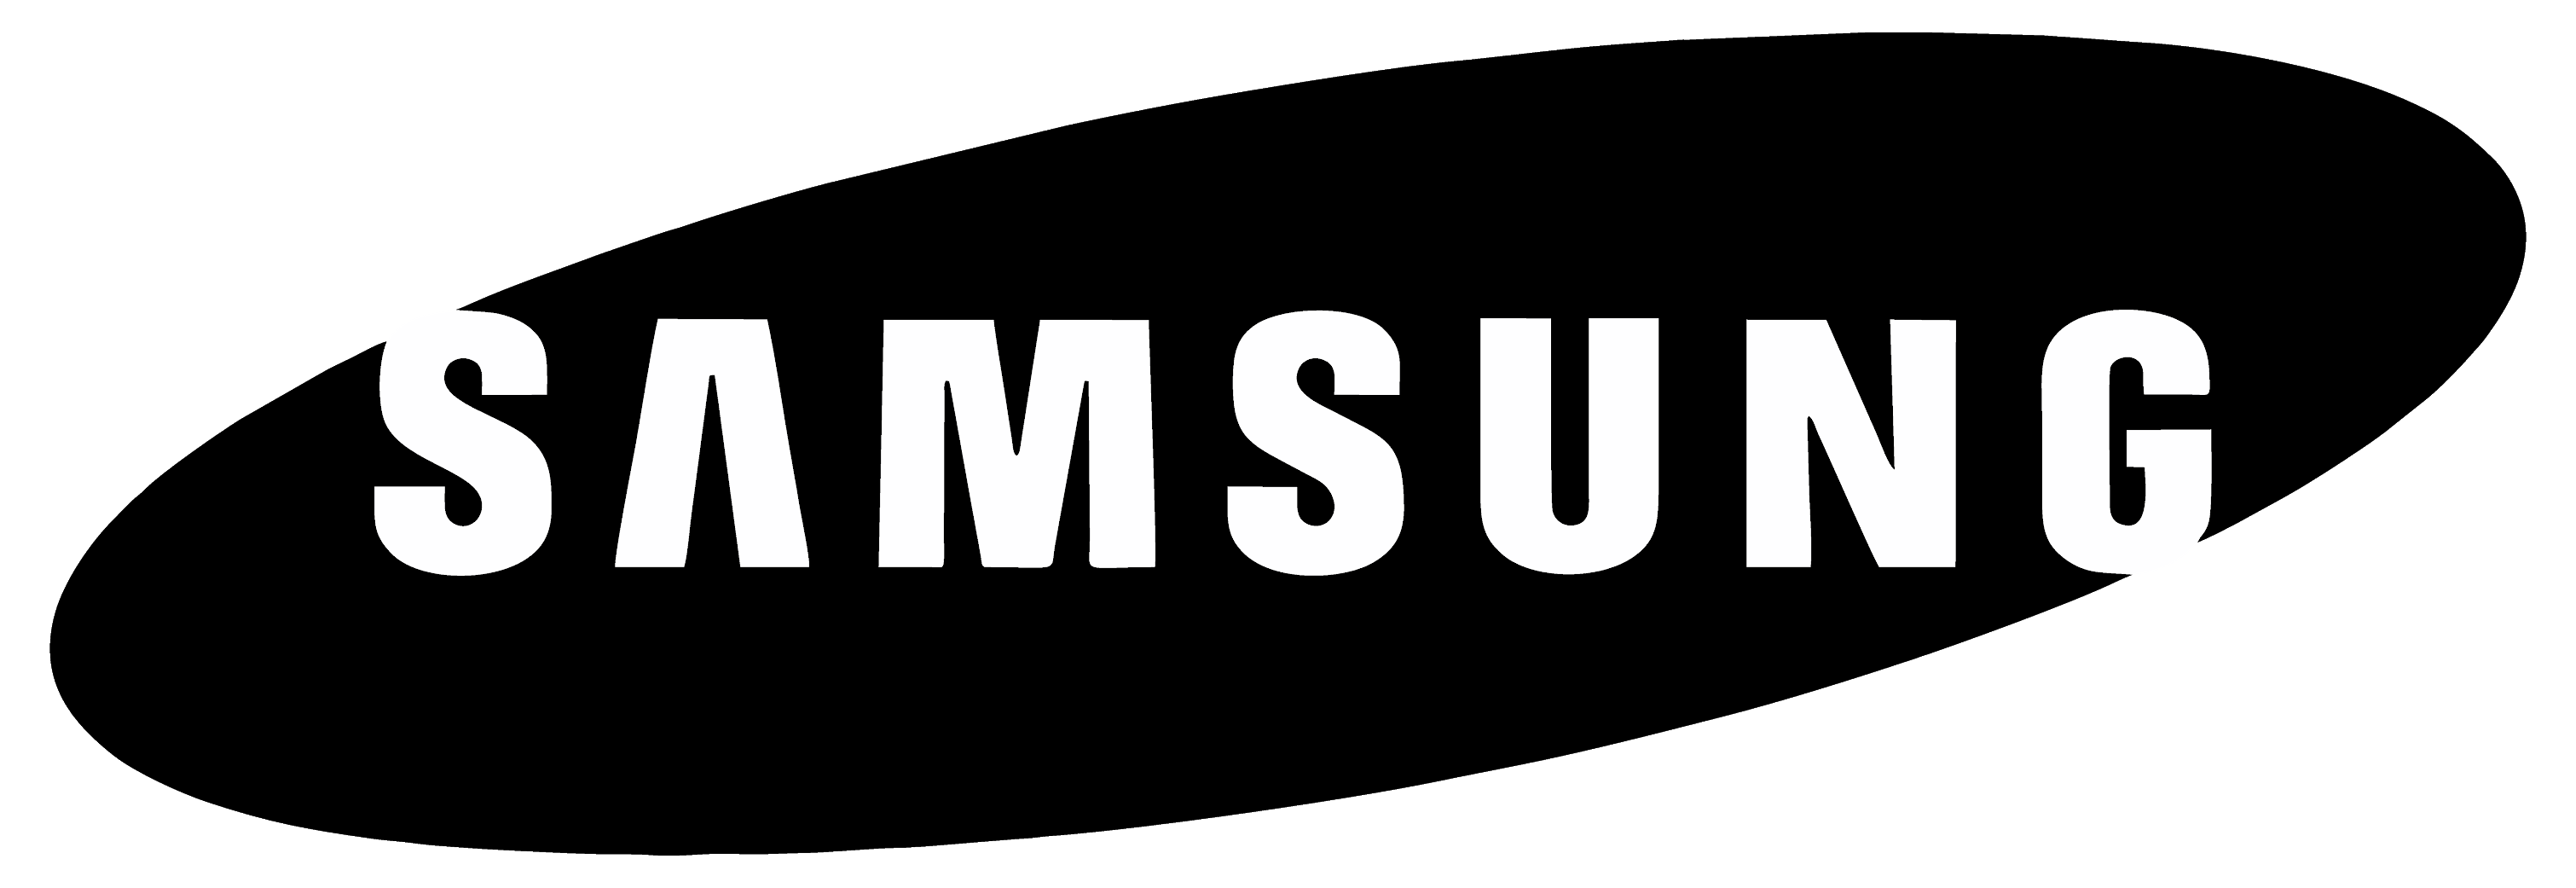 Samsung logo Cut Out Stock Images & Pictures - Alamy